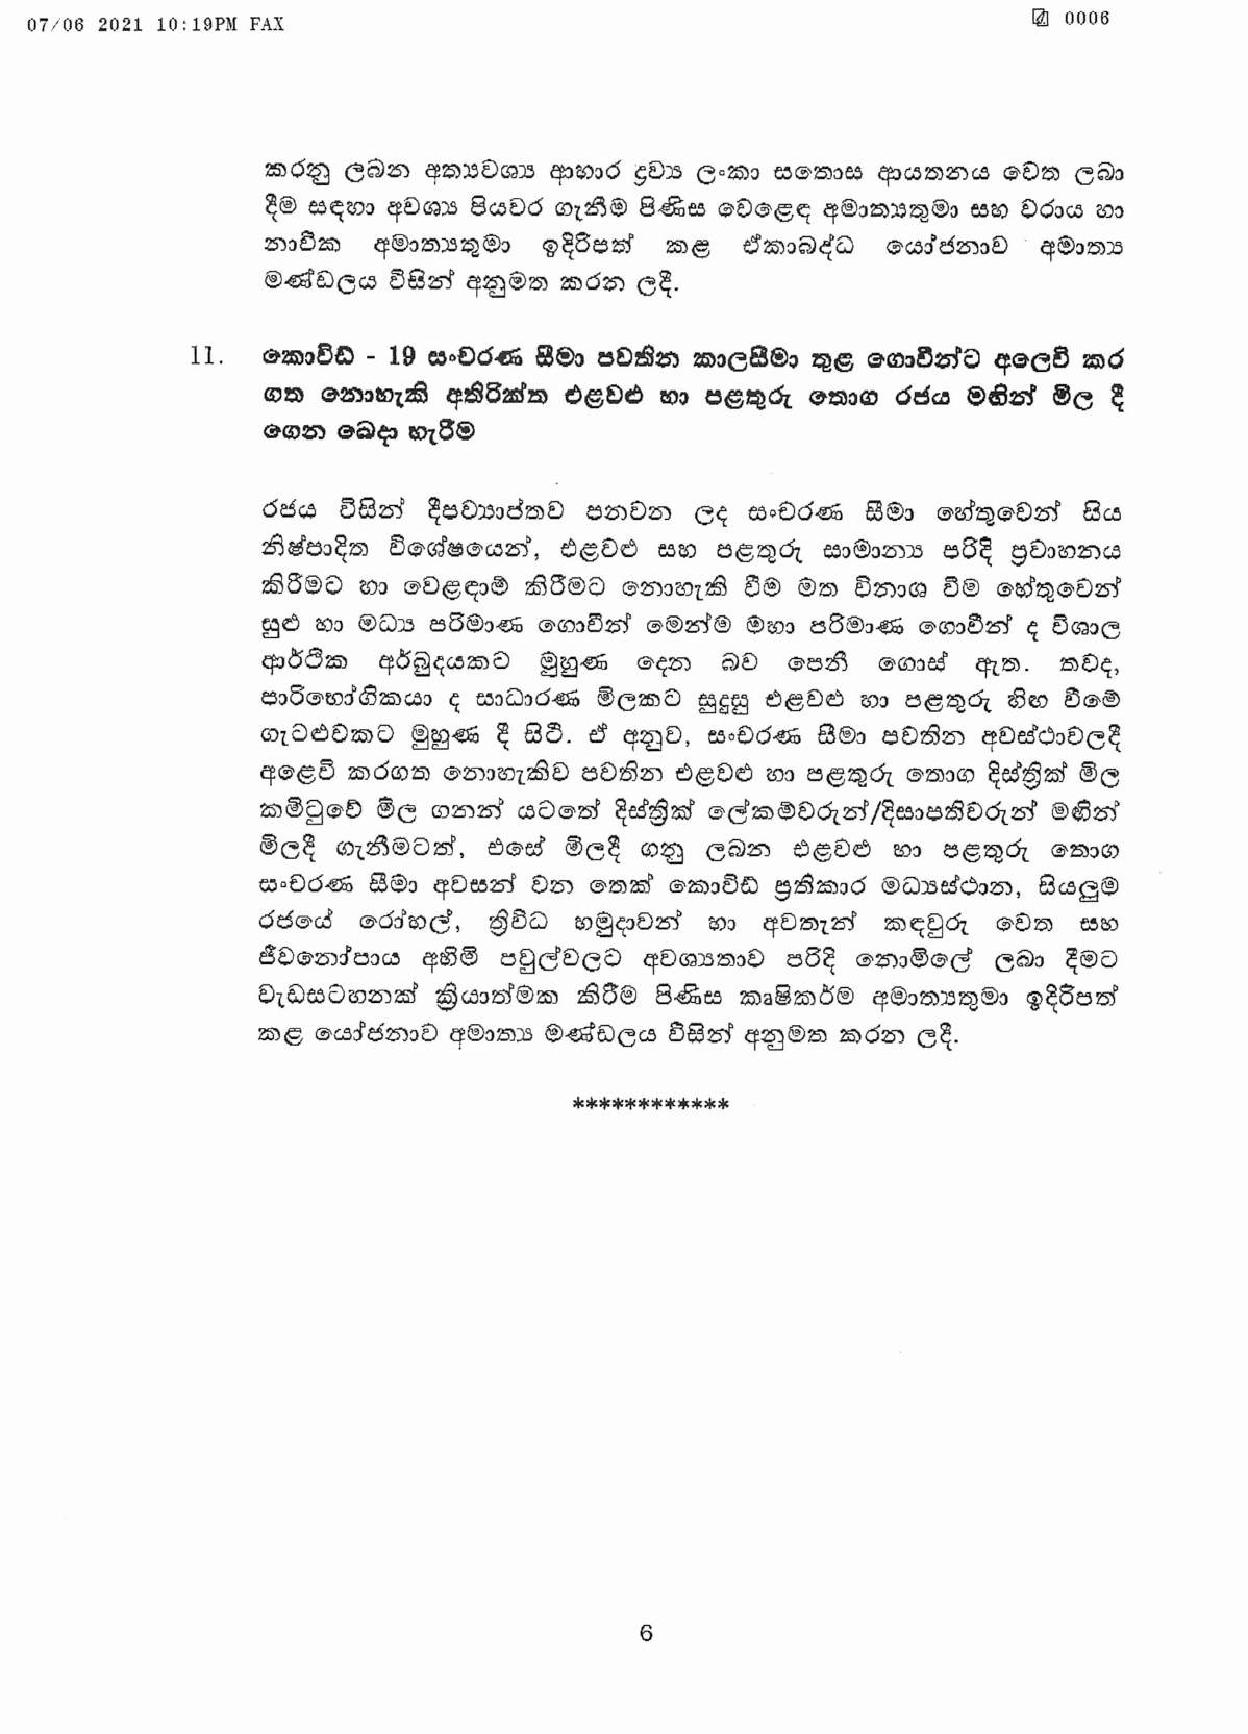 Cabinet Decisions on 07.06.2021 page 006